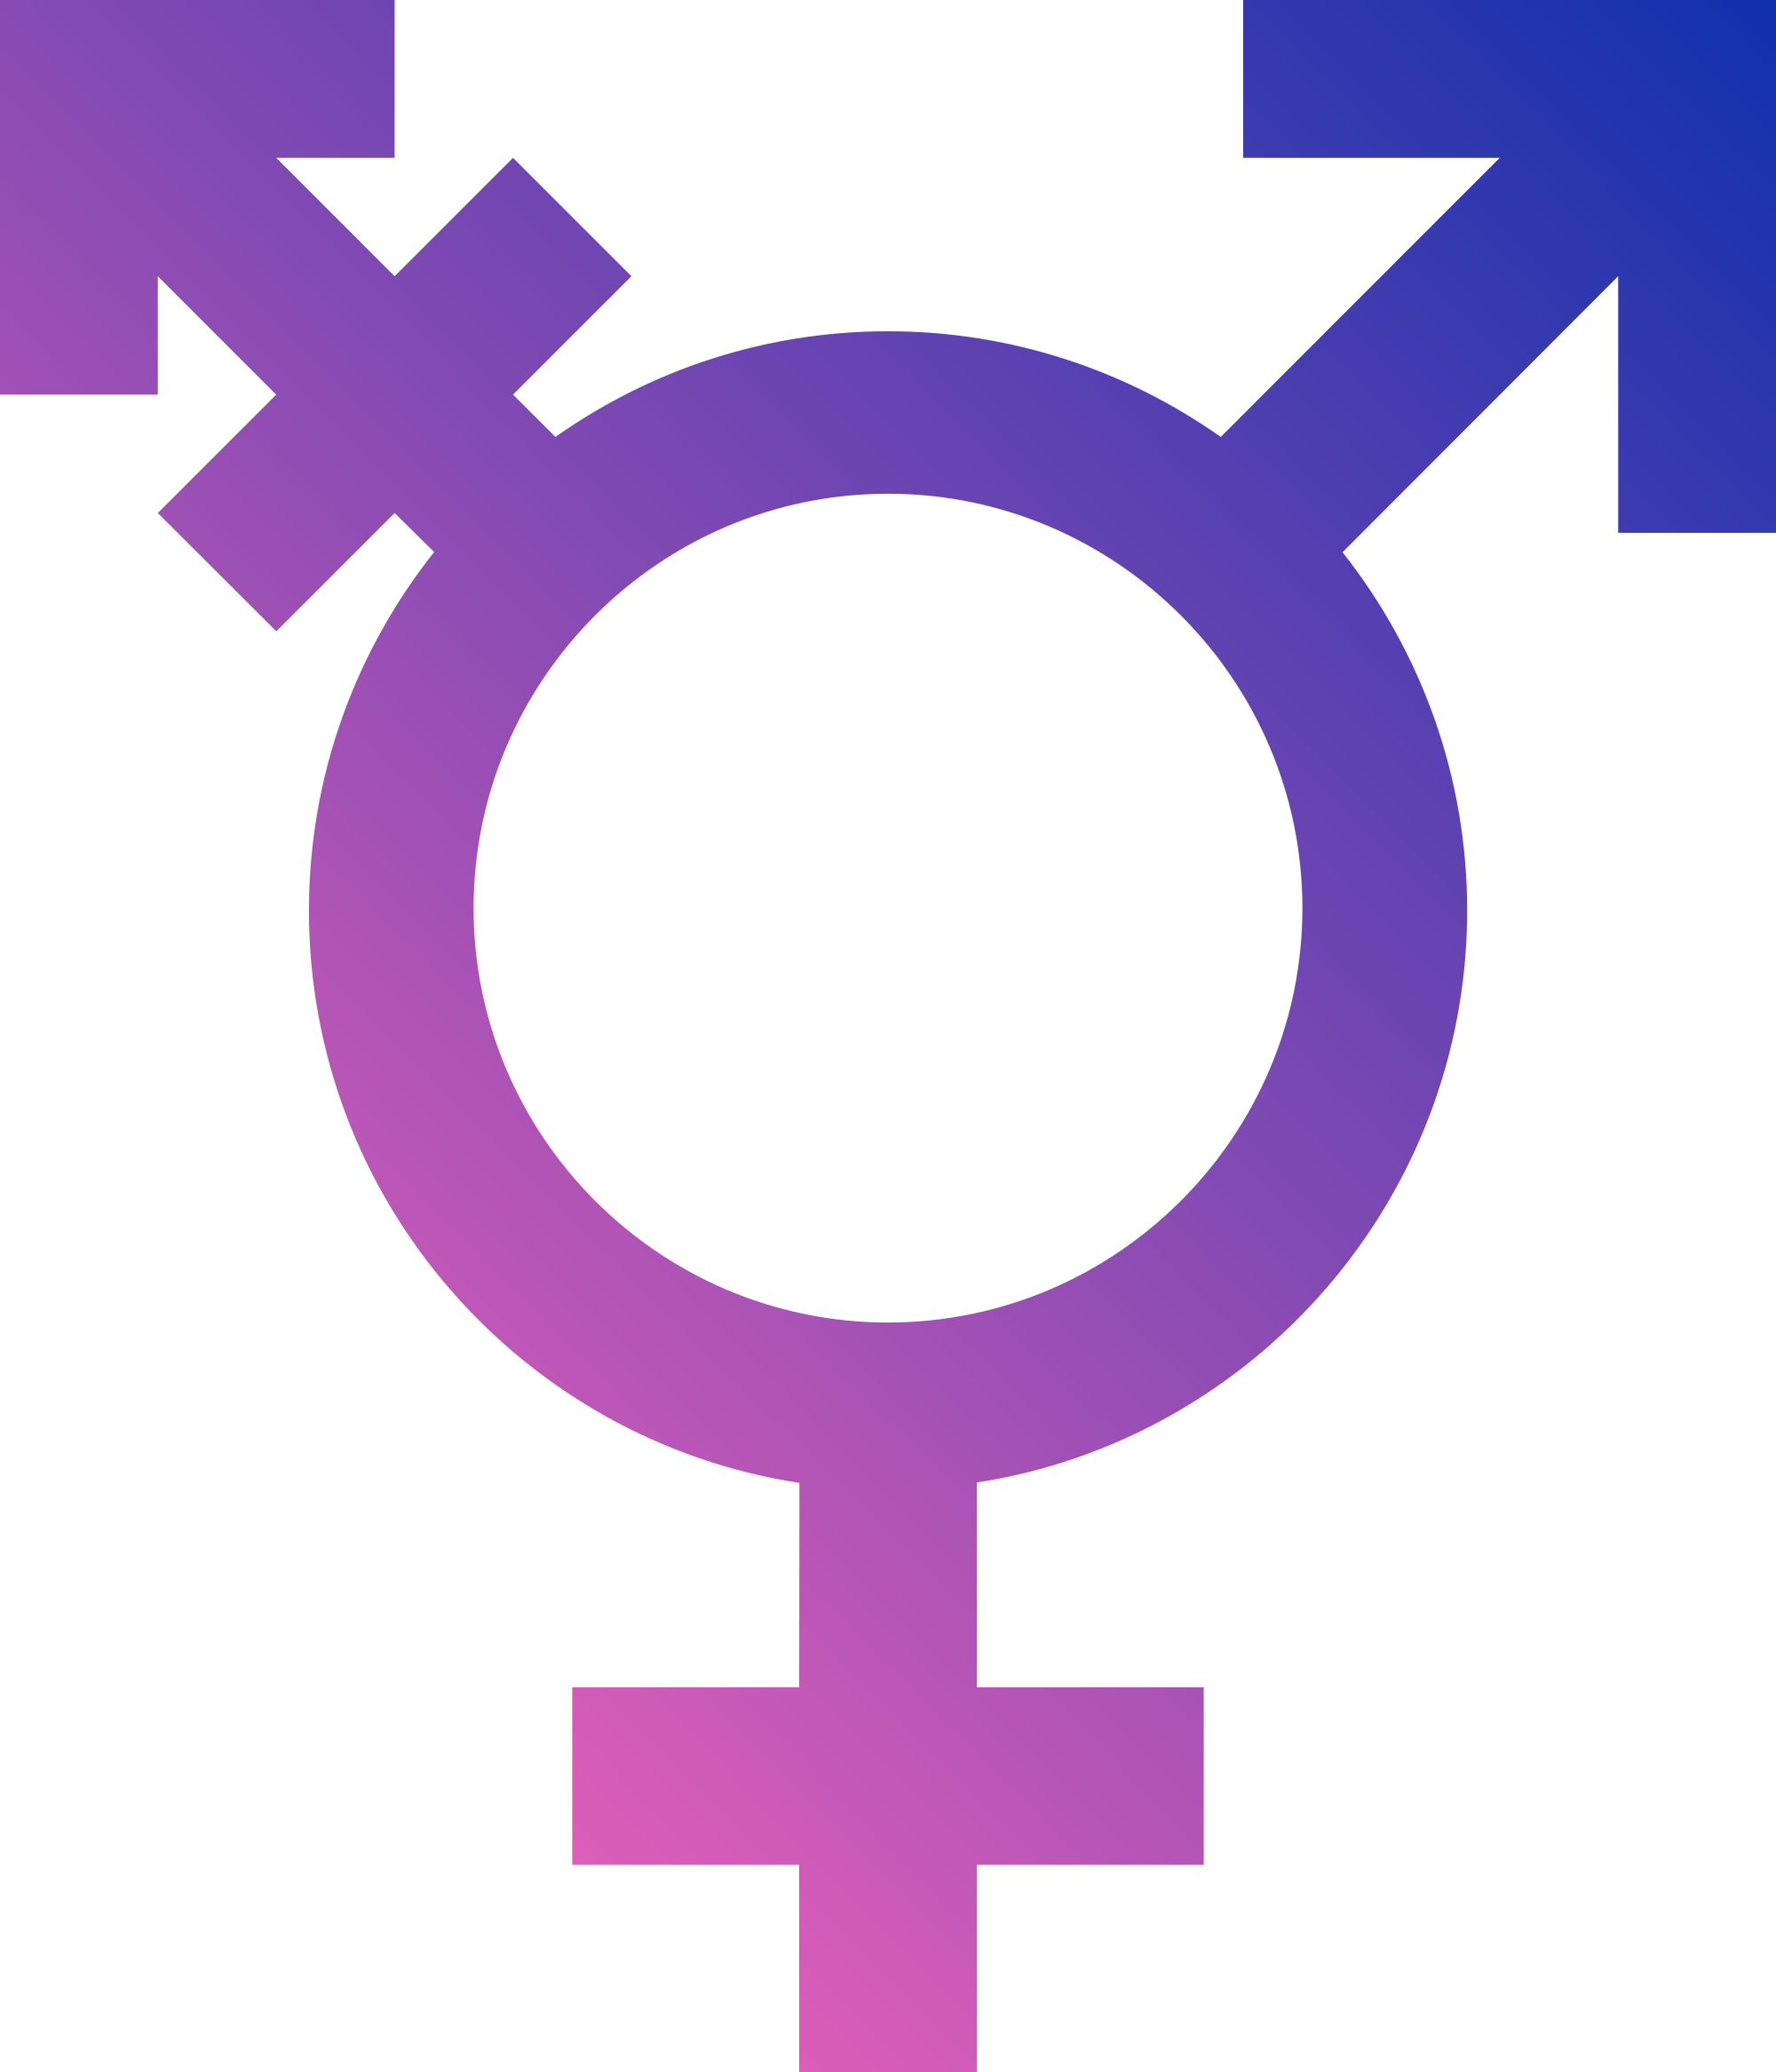 Icon symbol to represent transgender identity that includes the Greek symbols for female and male and a symbol that combines the male and female